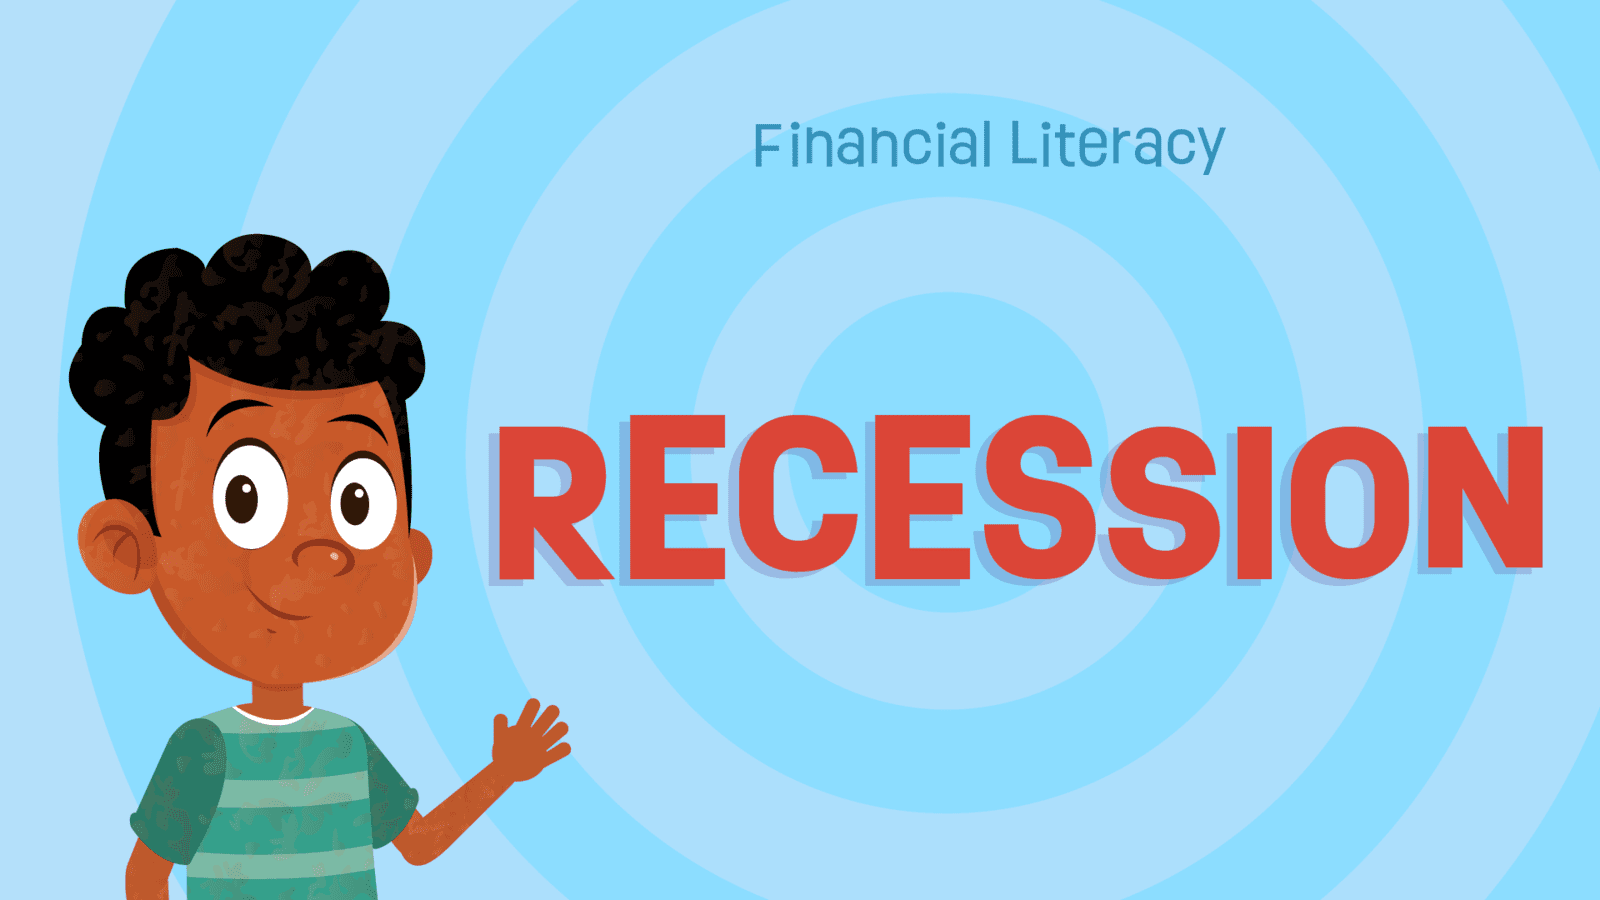 What is Recession?